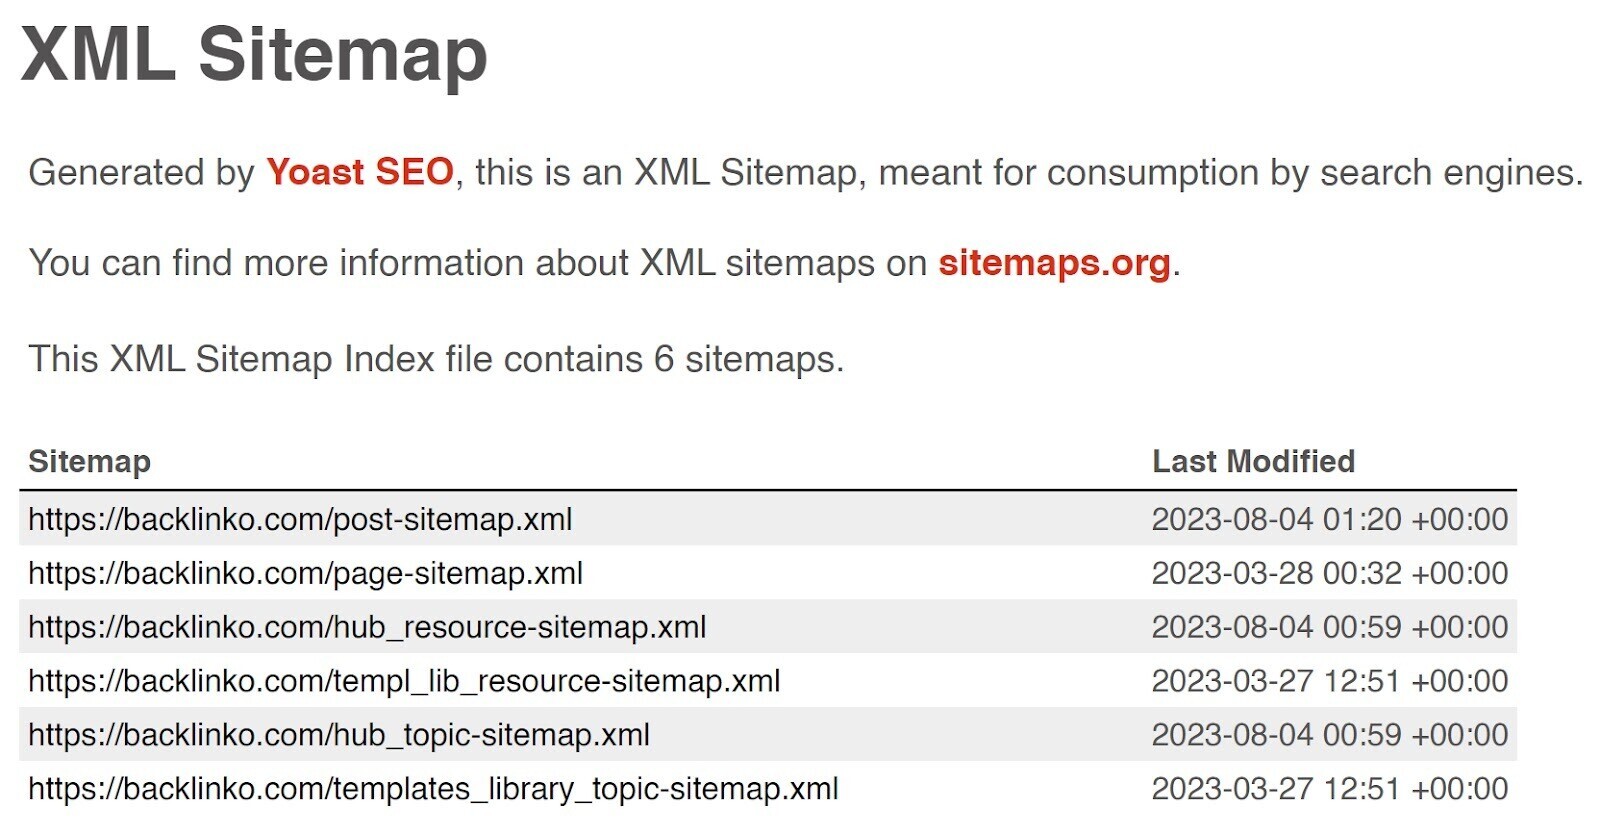 an example of XML sitemap generated by Yoast SEO